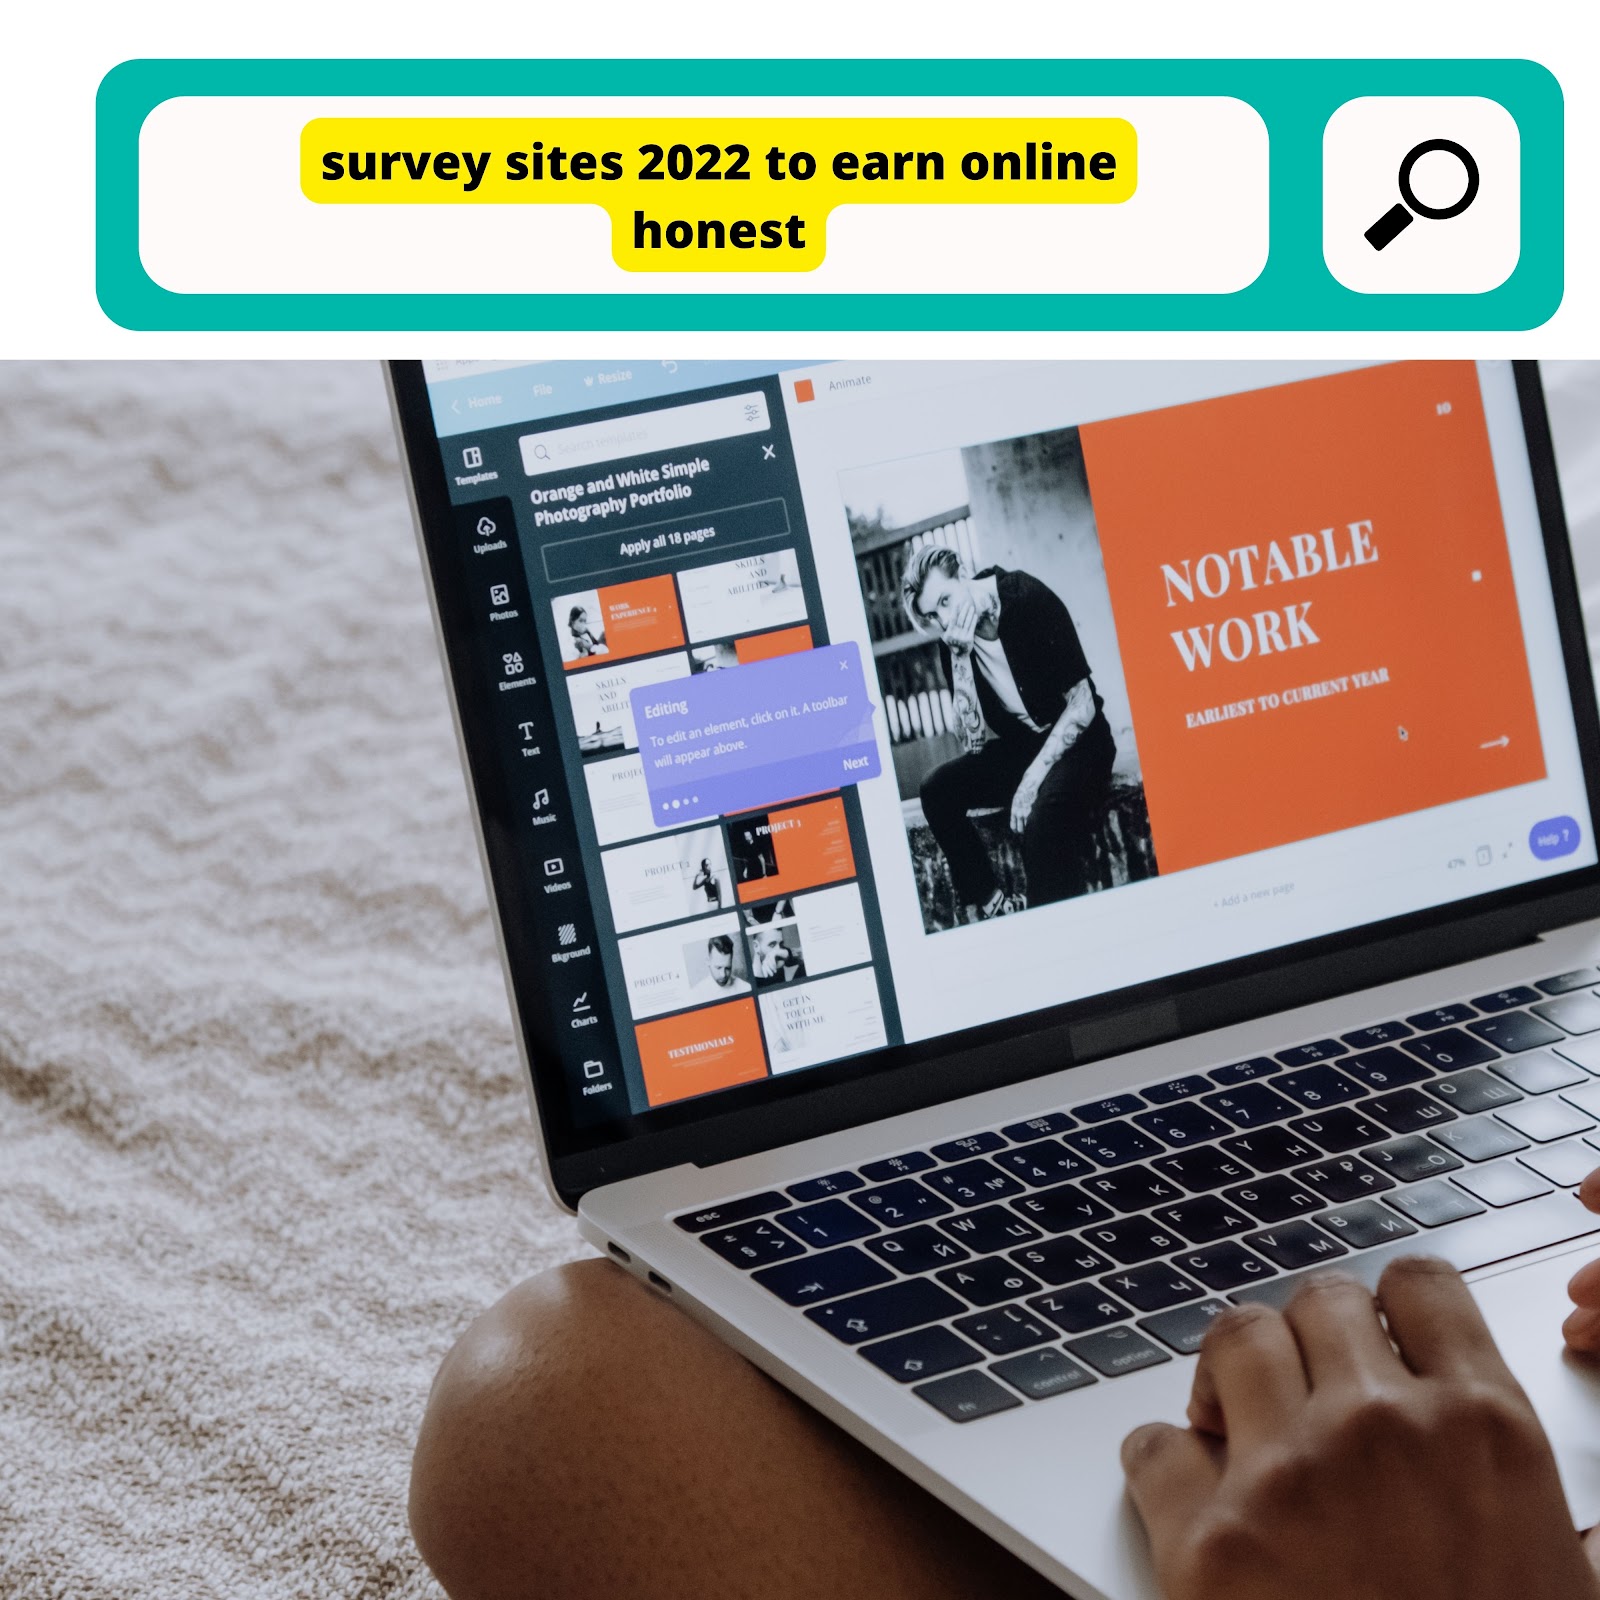 The best American survey sites 2022 to earn online honest